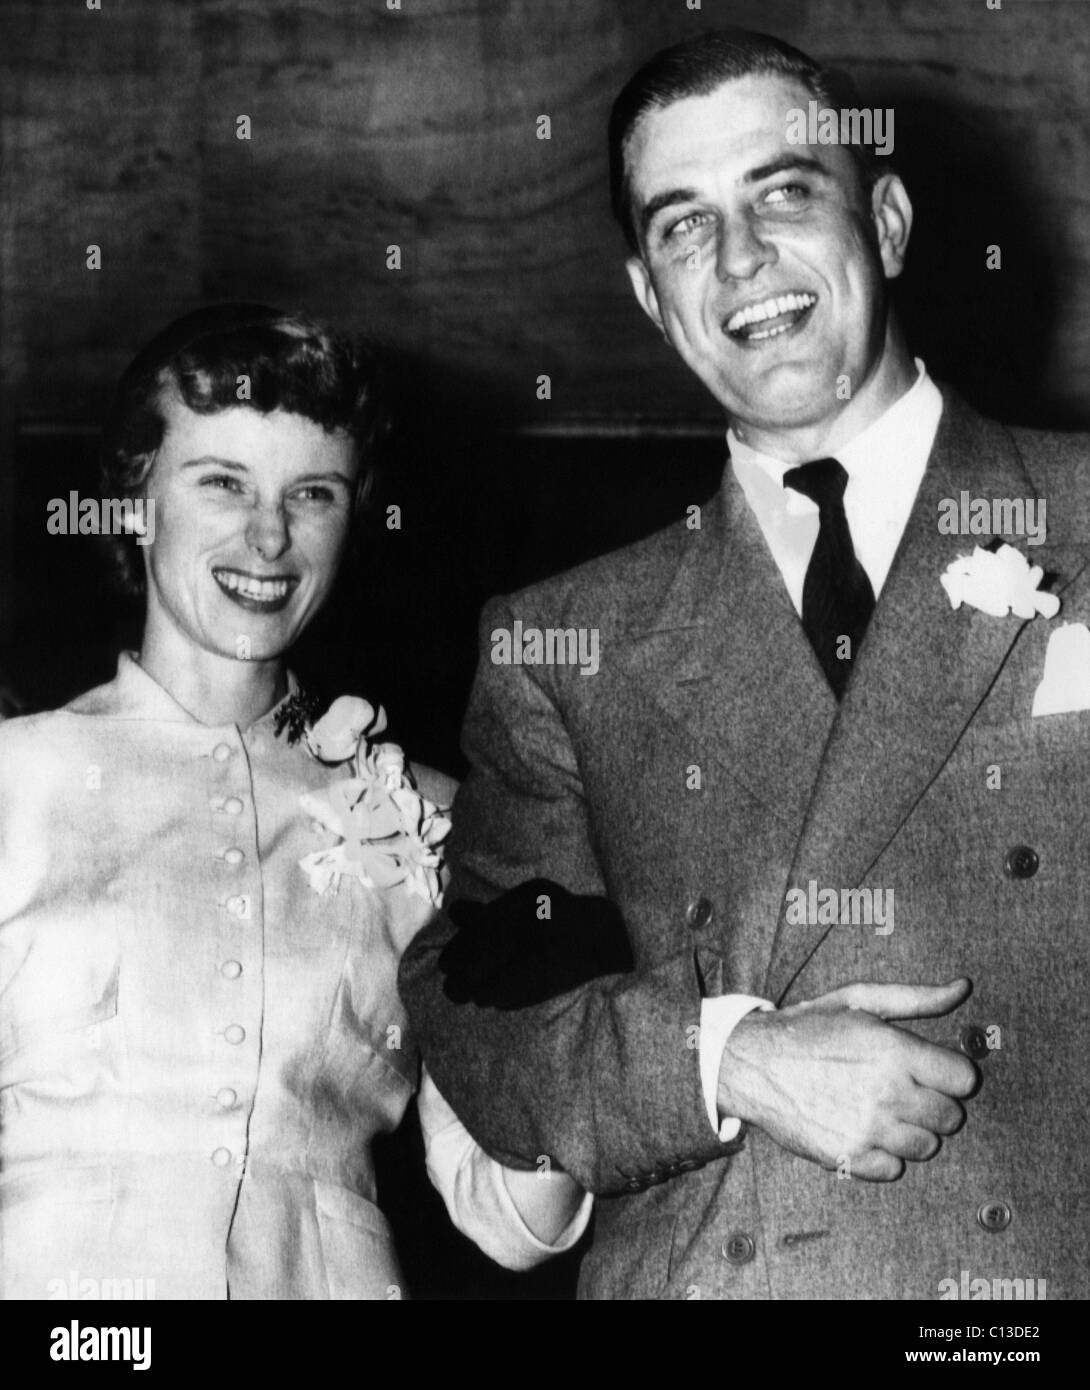 FDR. Suzanne Perrin Roosevelt and Franklin Roosevelt, Jr. (son of US President Franklin Delano Roosevelt), at their wedding reception, New York City, 1949. Stock Photo